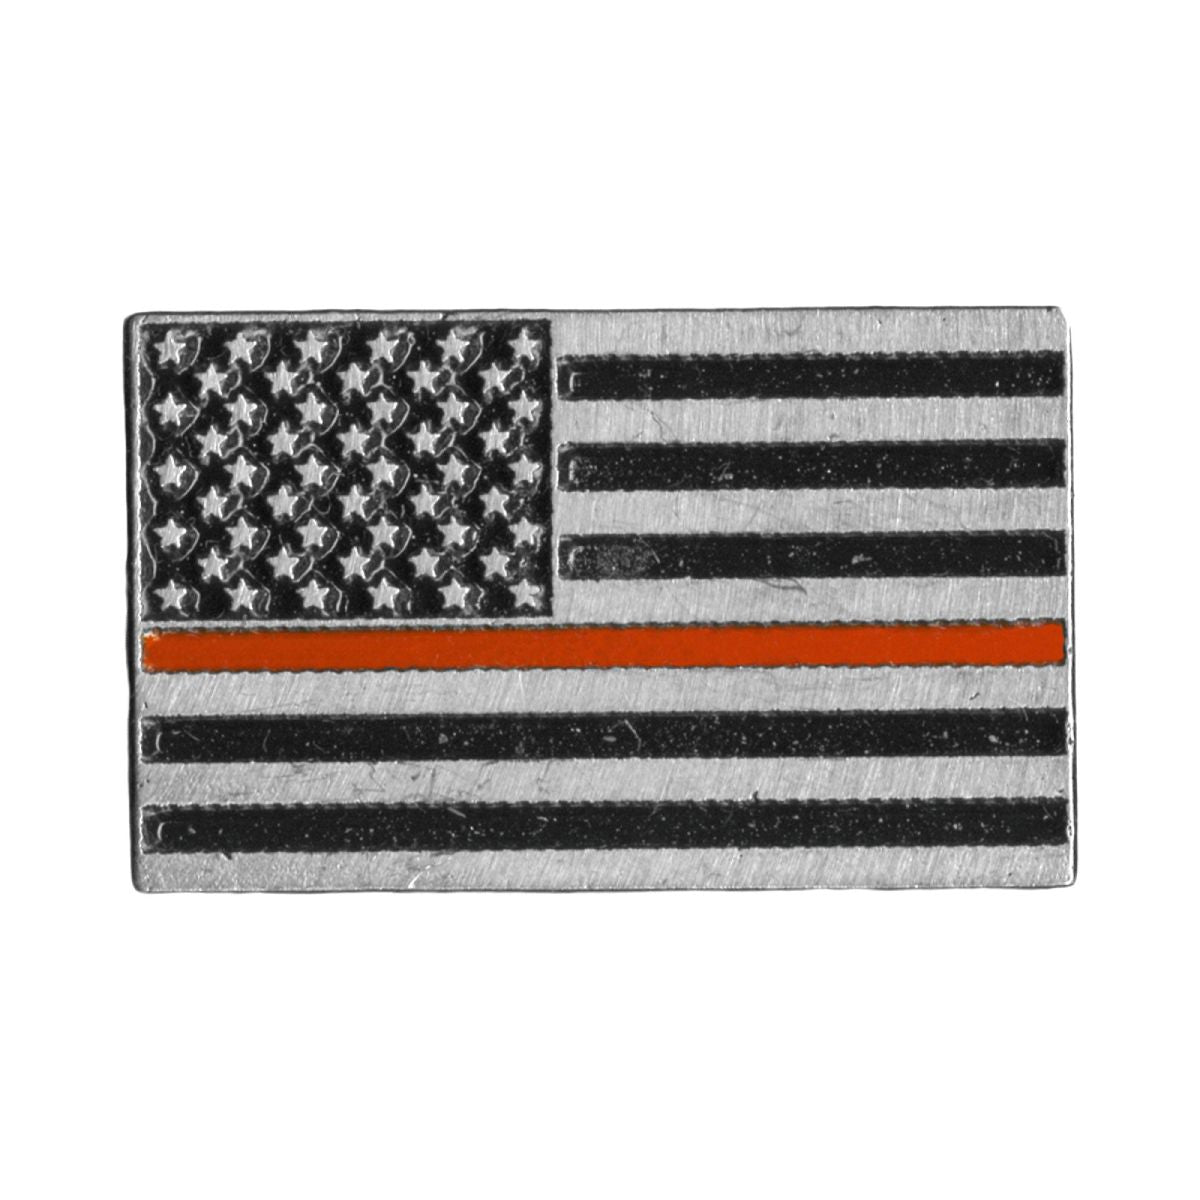 Hot Leathers PNA1302 Thin Red Line American Flag Pin